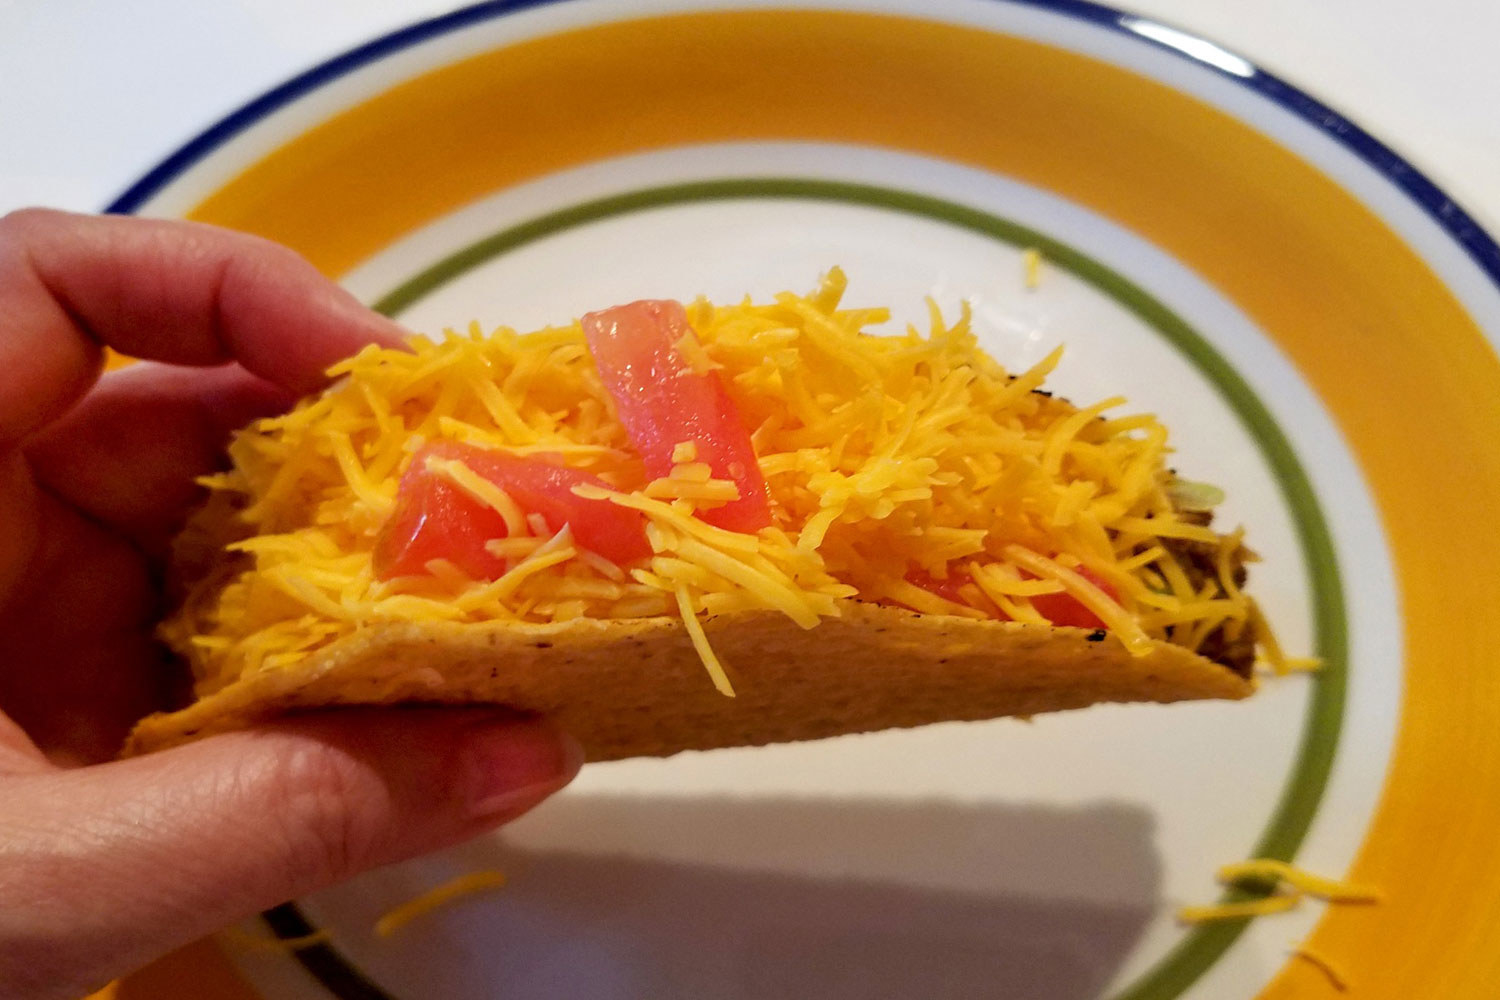 A hard taco filled with beef, cheese, and tomato.